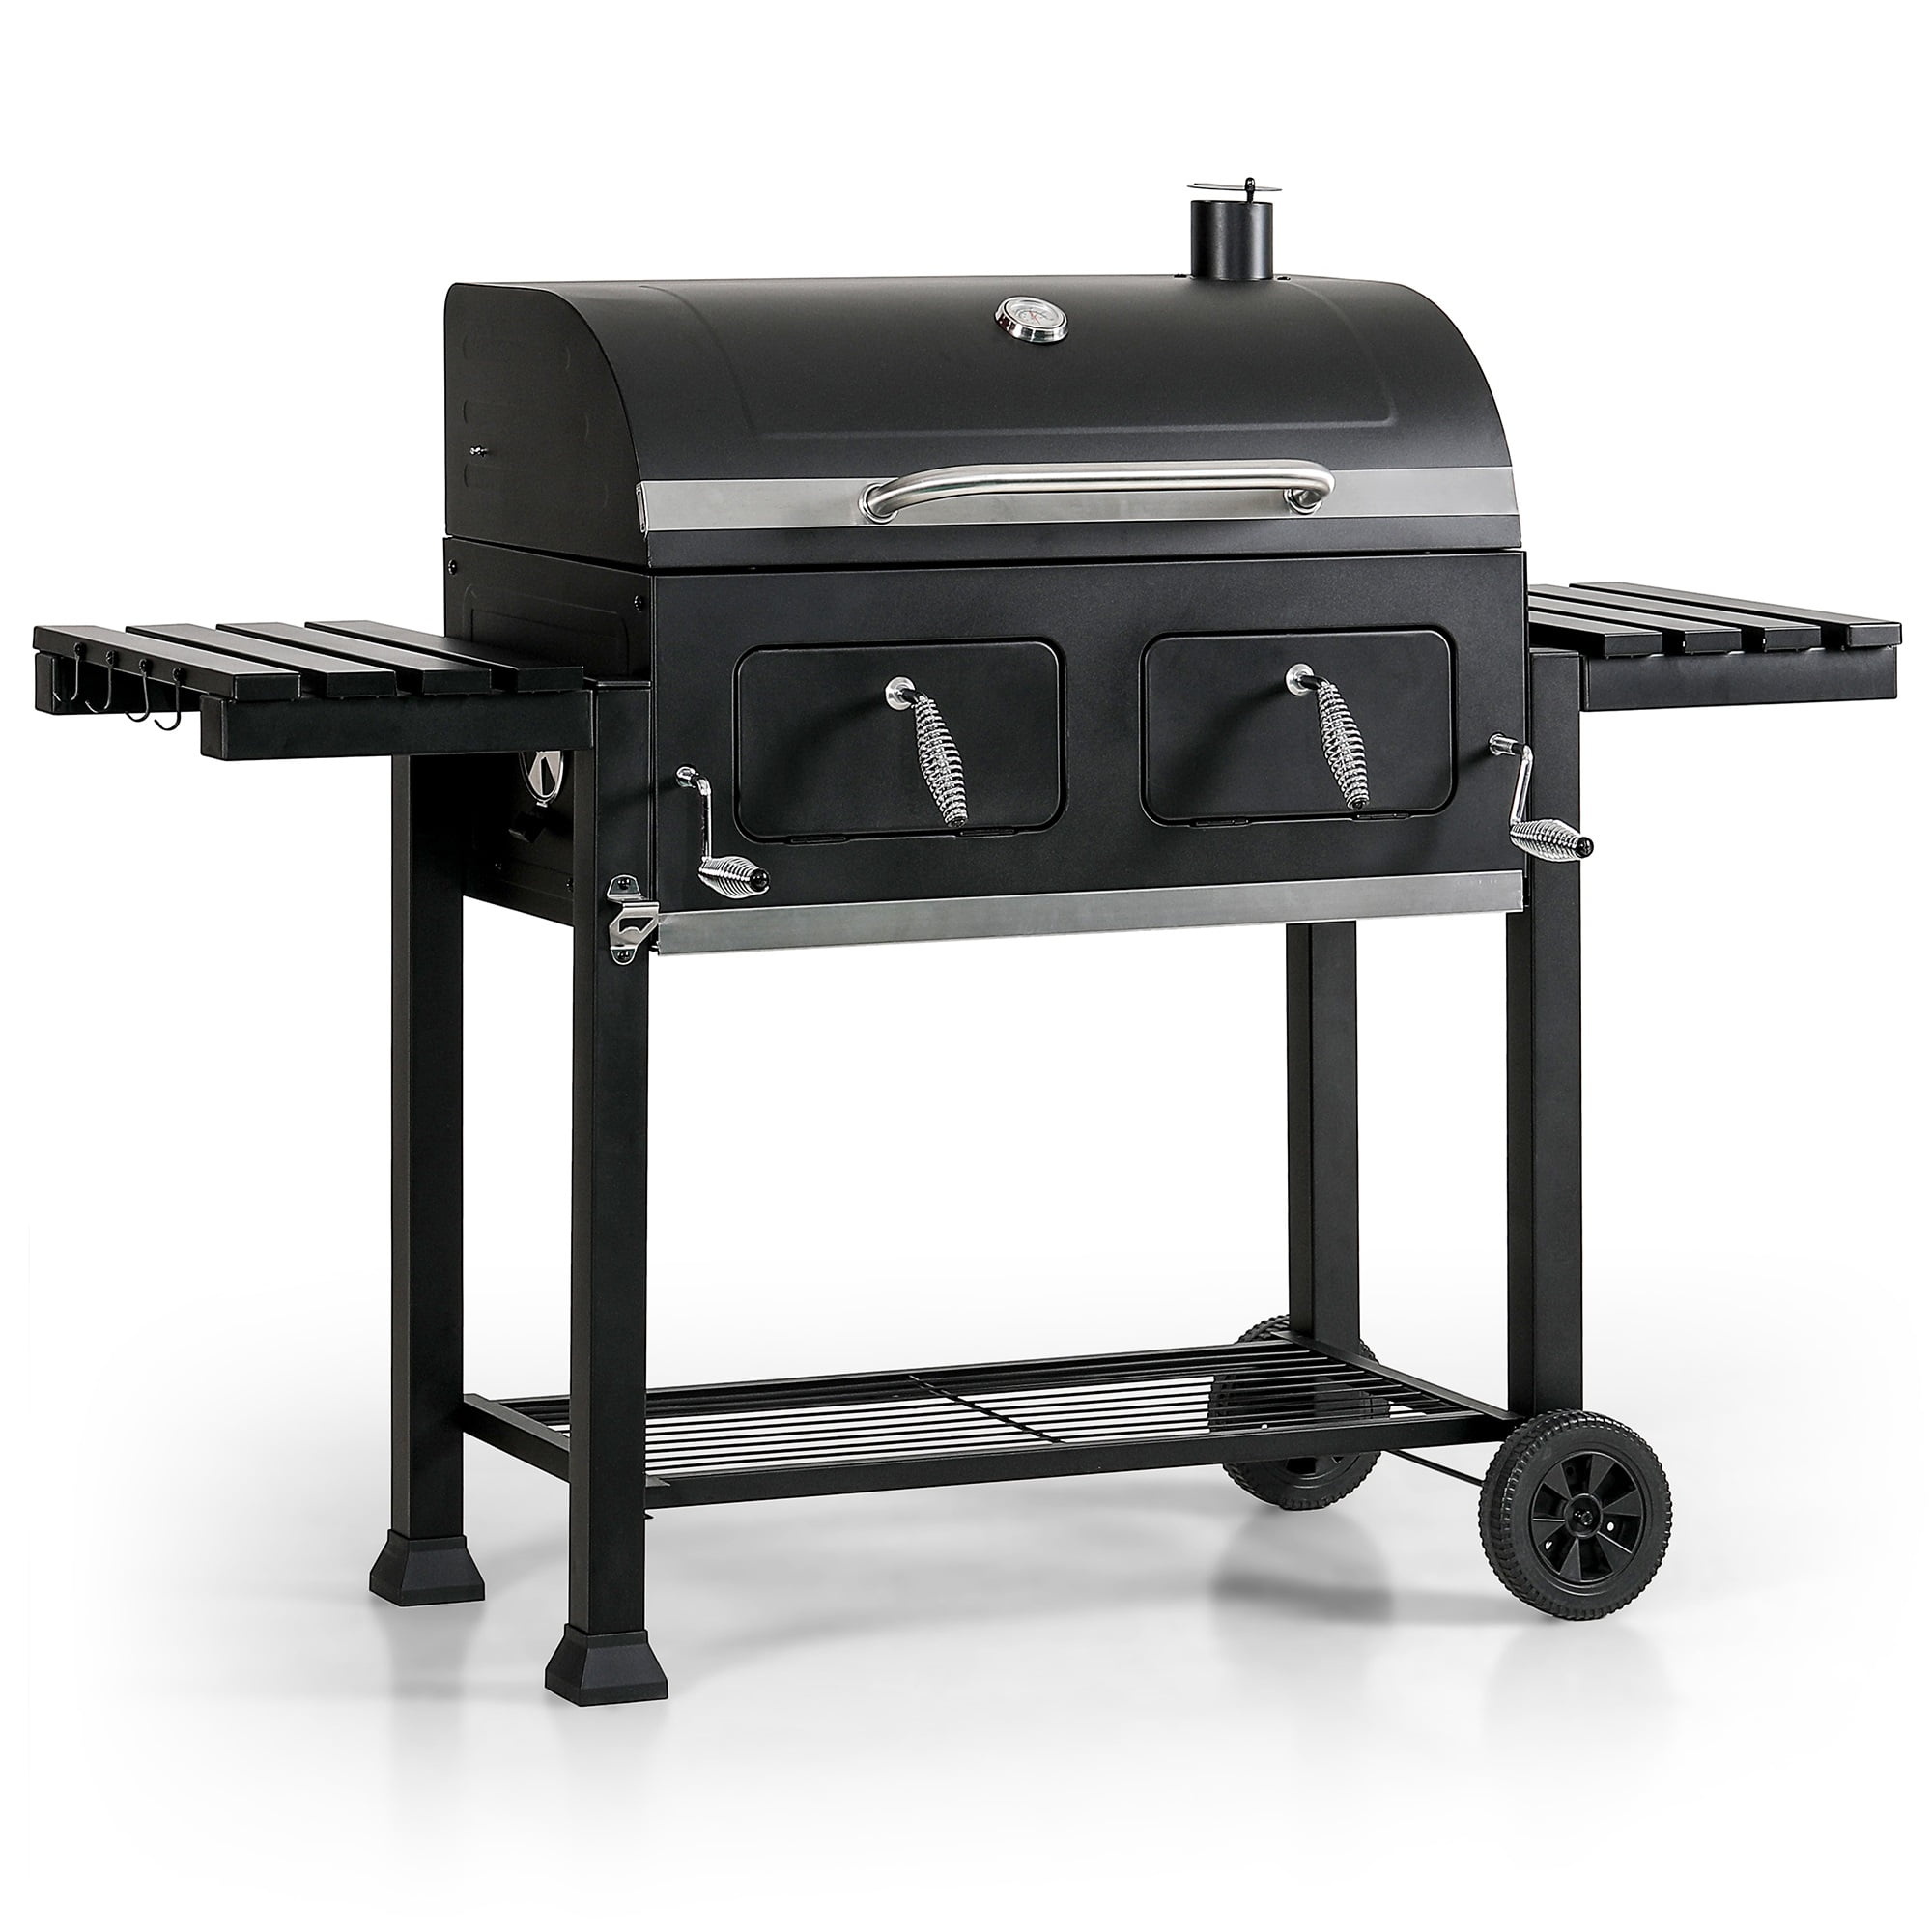 Festnight Barbecue américain Smoker fumoir Double Compartiment Grill 